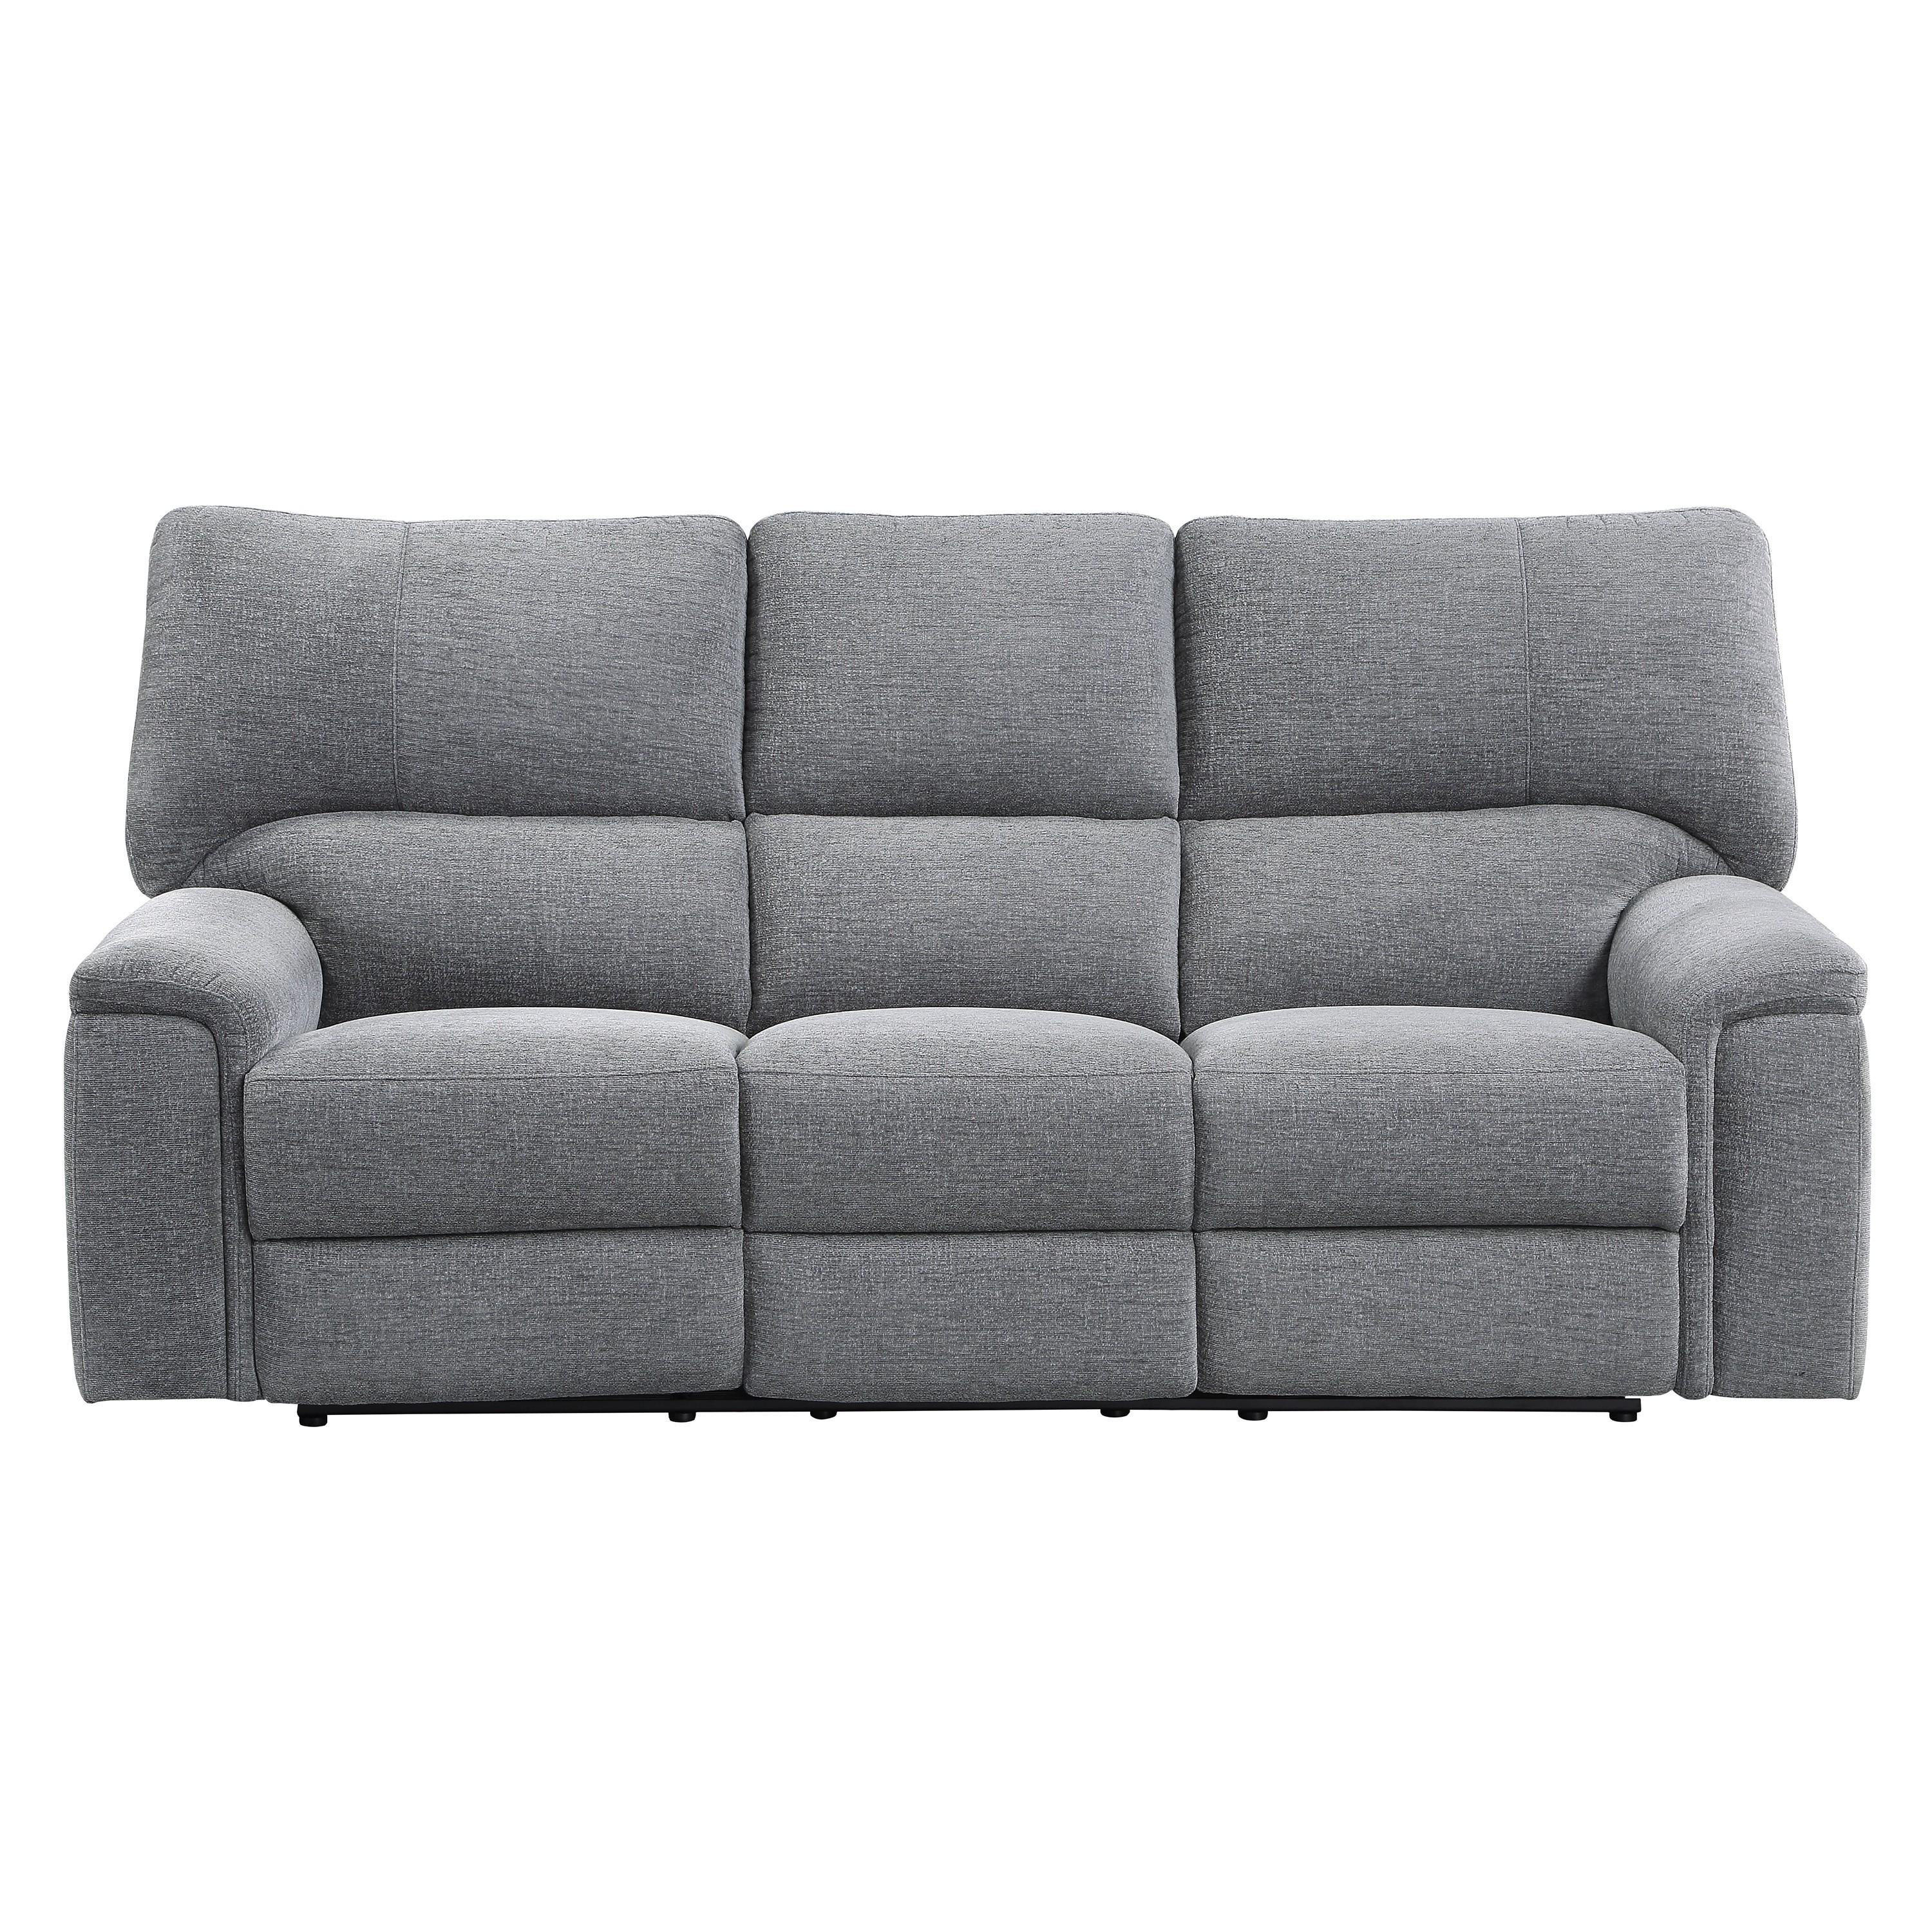 Transitional Power Reclining Sofa 9413CC-3PWH Dickinson 9413CC-3PWH in Charcoal Chenille